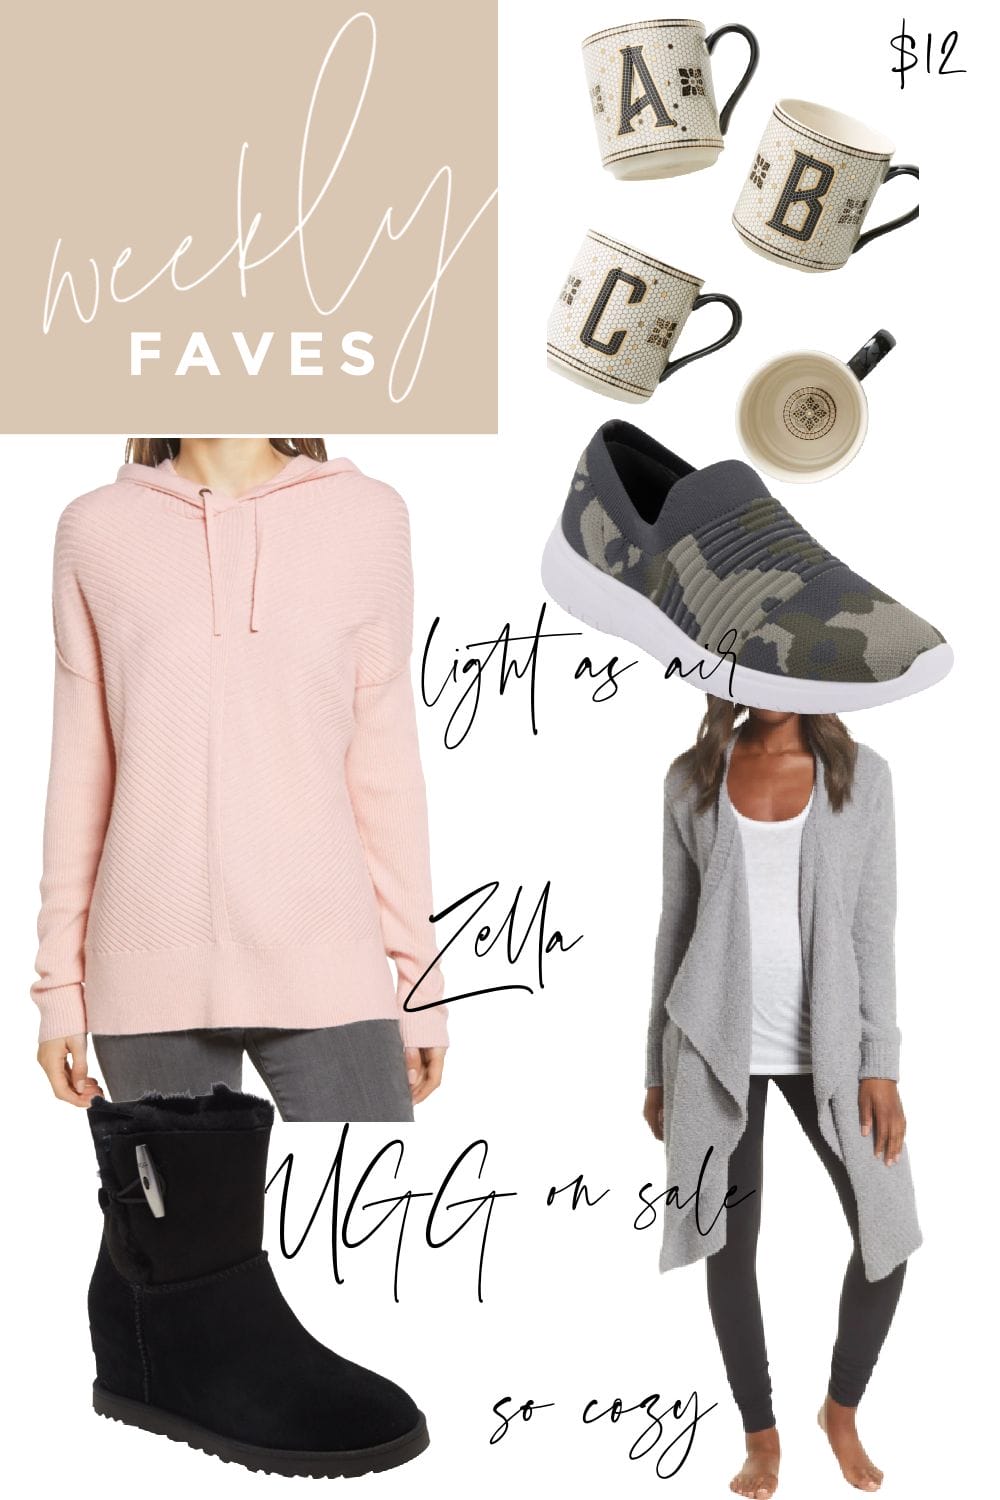 Weekly Faves 12.2.20